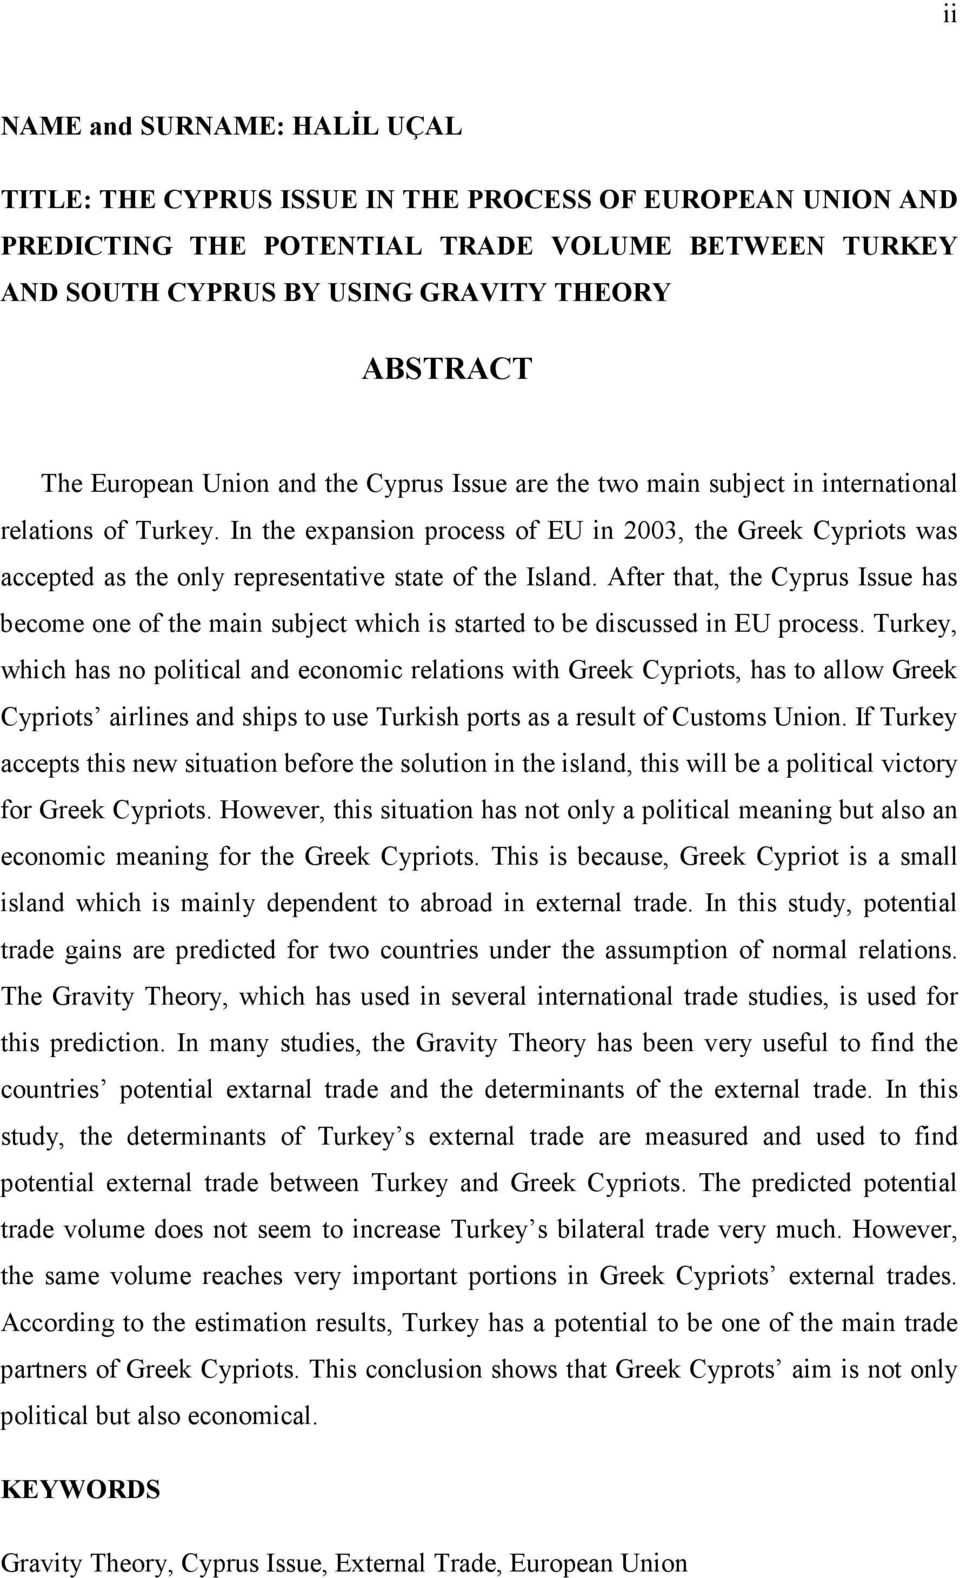 In the expanson process of EU n 2003, the Greek Cyprots was accepted as the only representatve state of the Island.